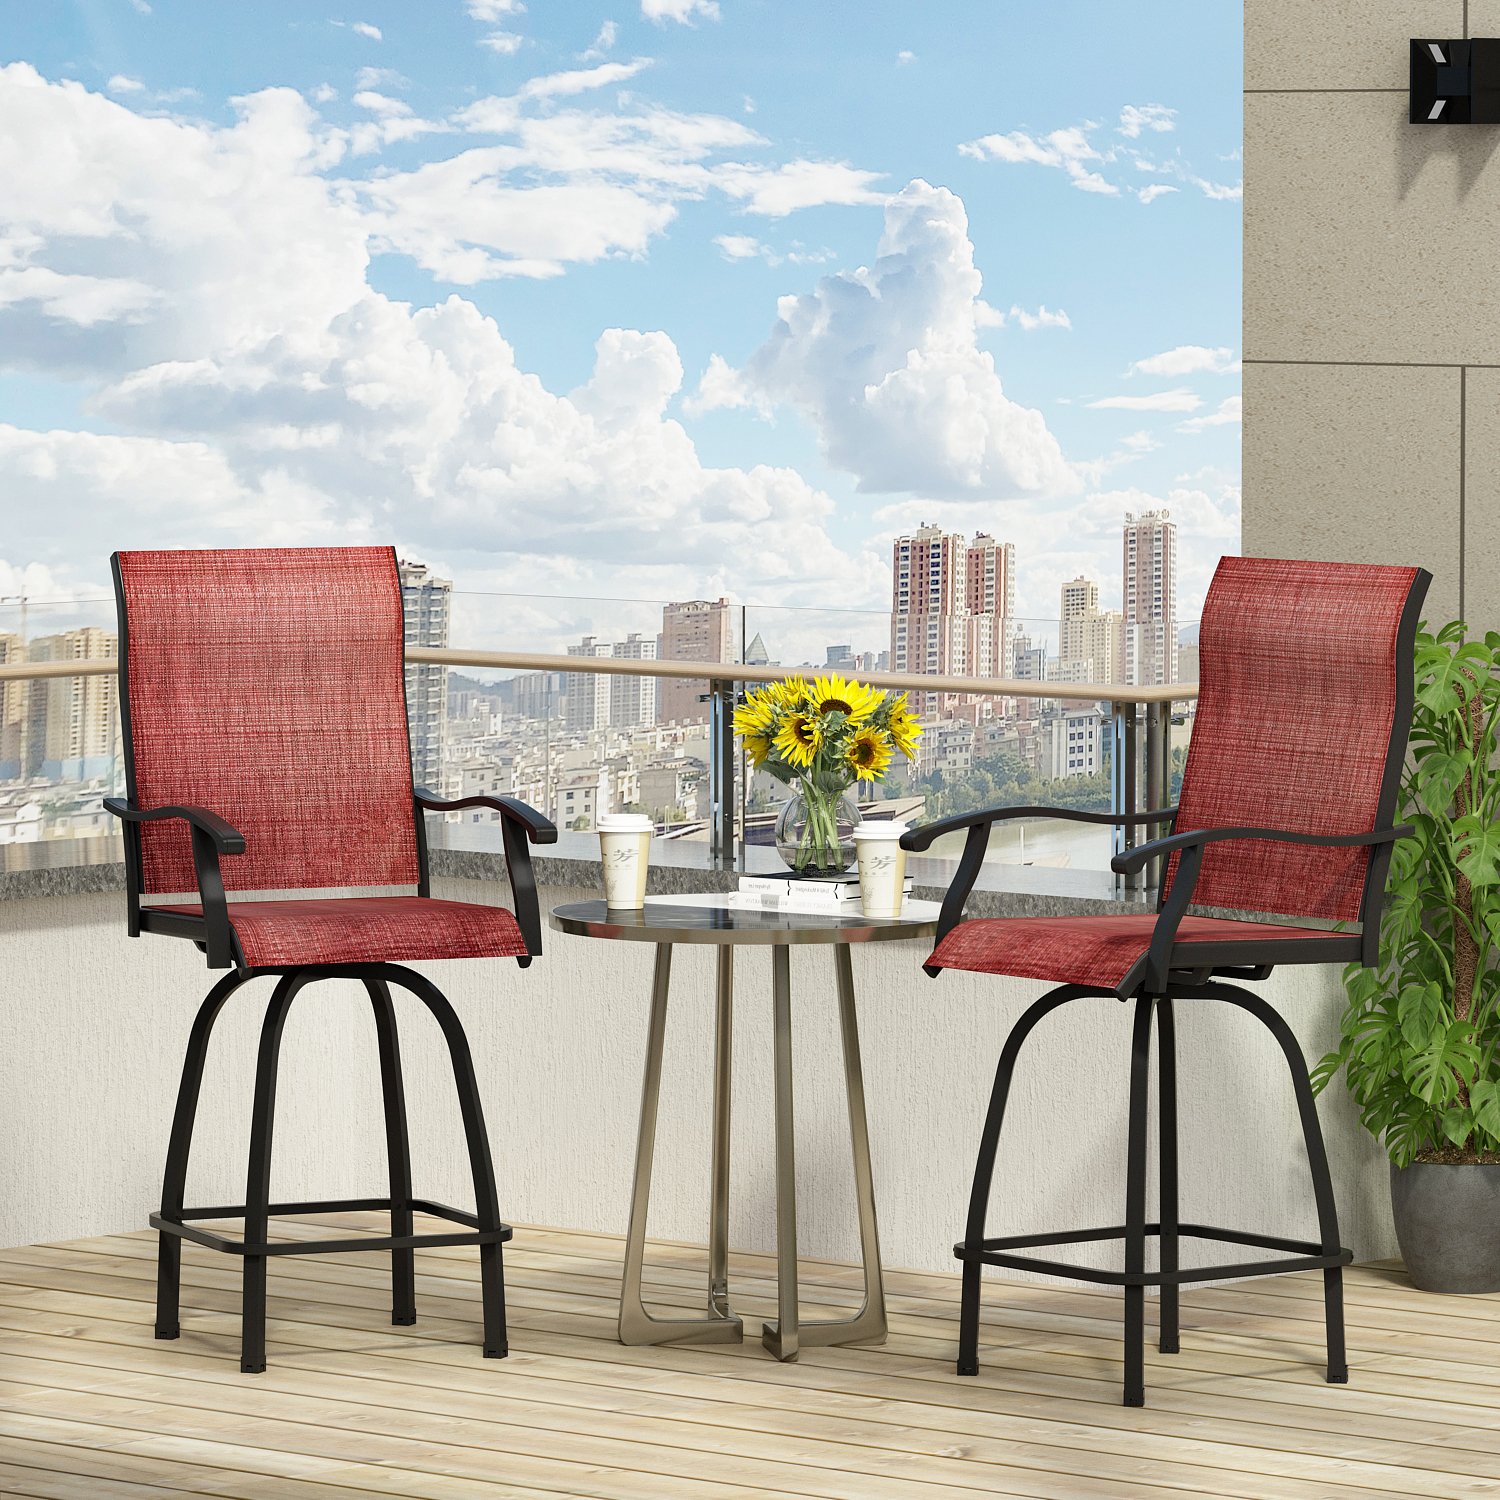 Homsee 2 Pack Patio Swivel Bar Height Patio Bistro Set, 360-Degree Swivel Outdoor Bar Stool, Red - image 1 of 8